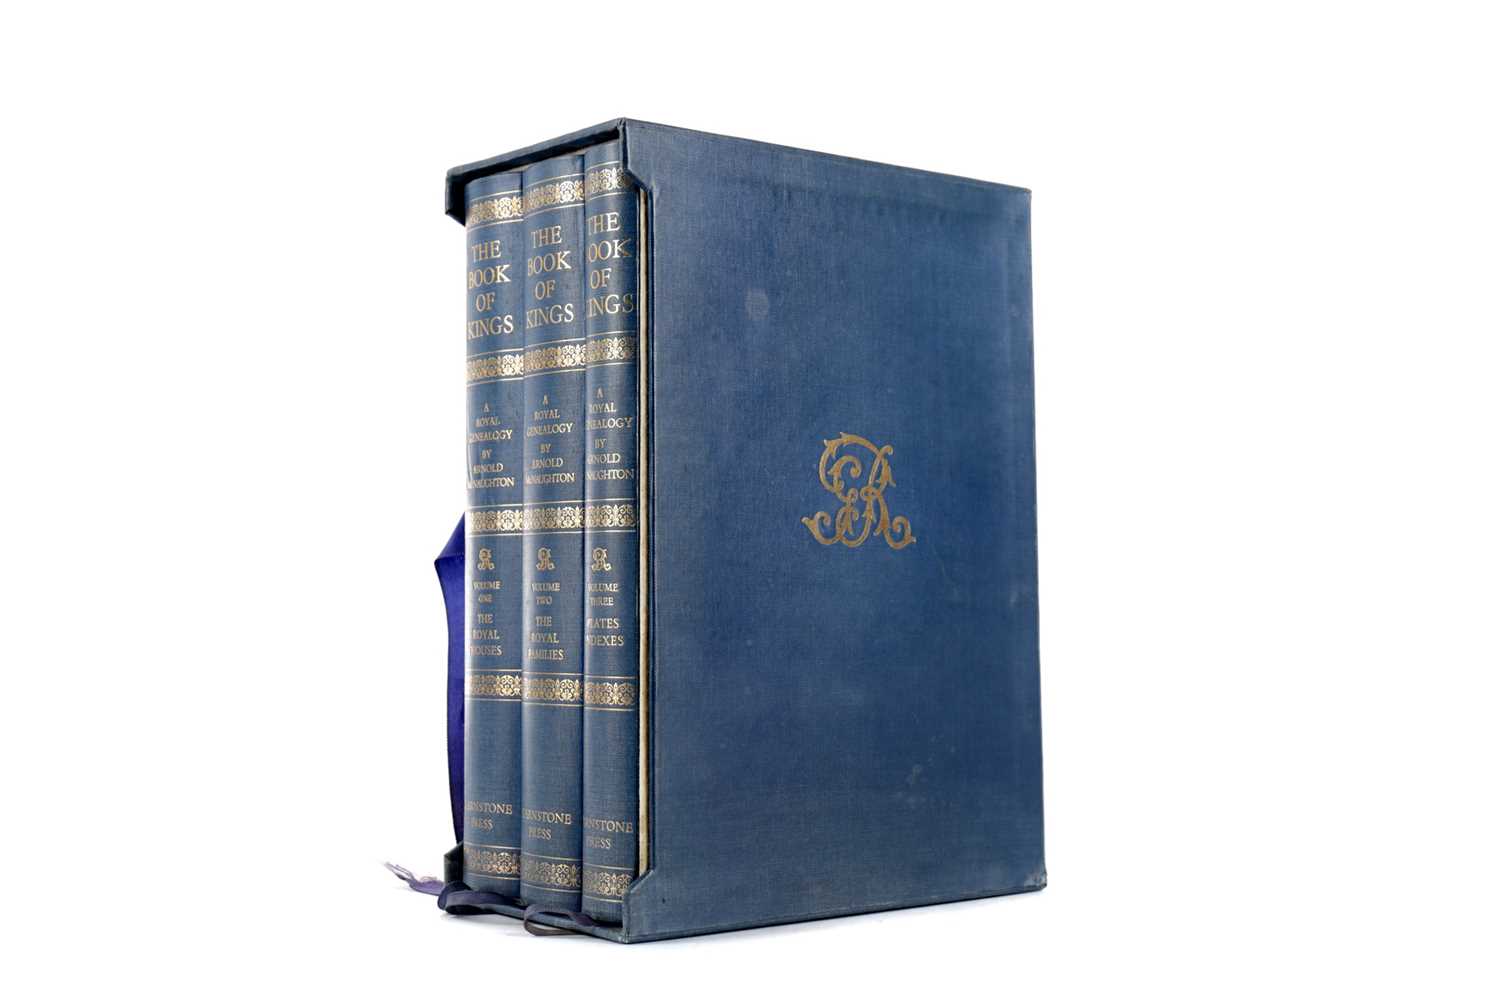 Lot 1106 - THREE VOLUMES OF THE BOOK OF KINGS BY ARNOLD MCNAUGHTON